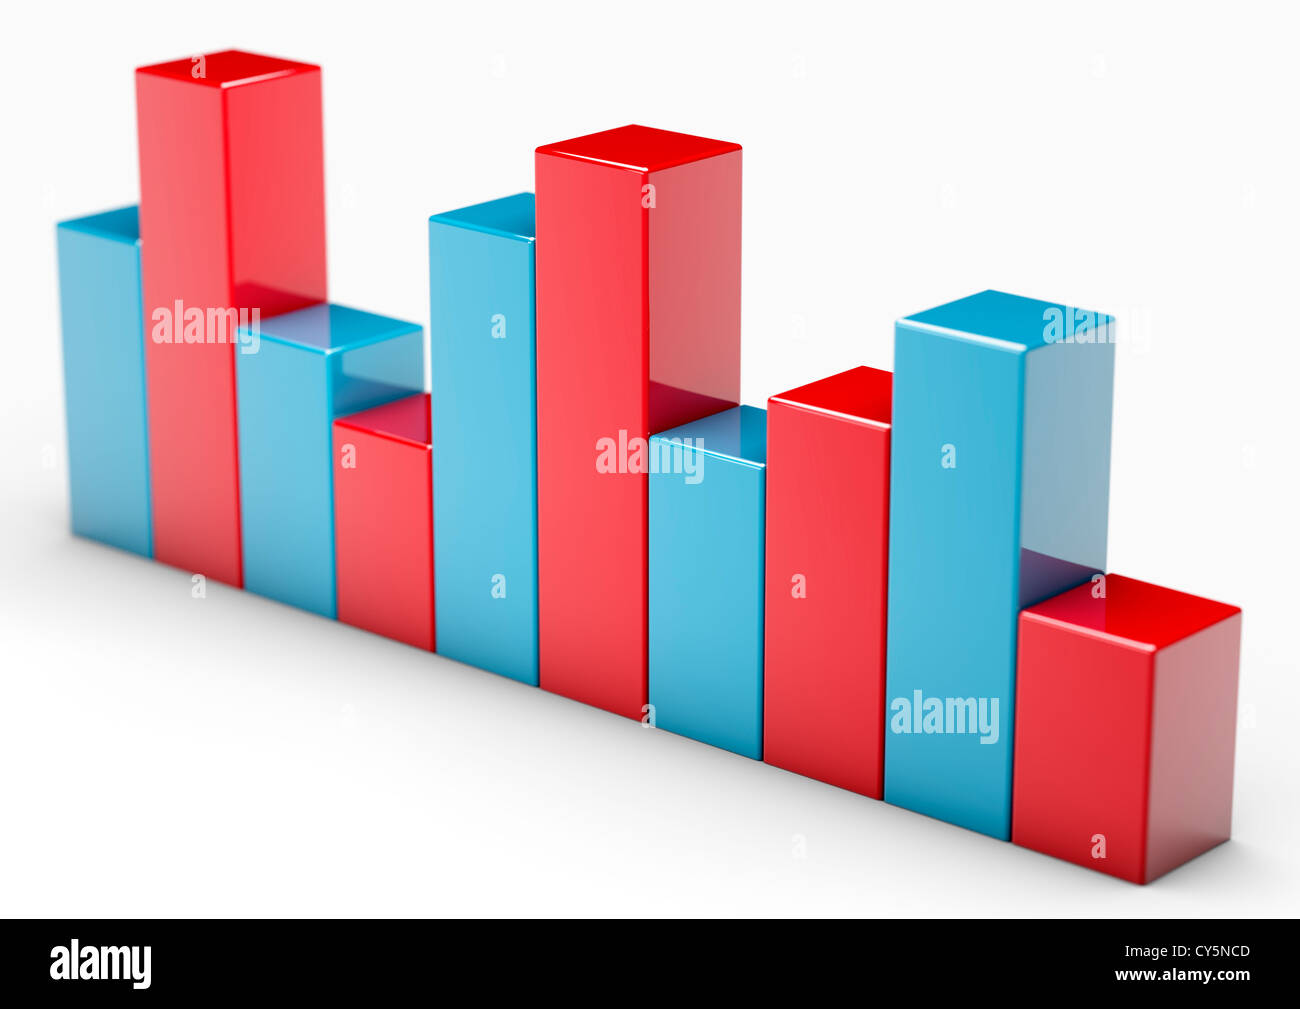 Series of red and blue shiny blocks forming a fluctuating bar graph - 3D render - Concept image Stock Photo